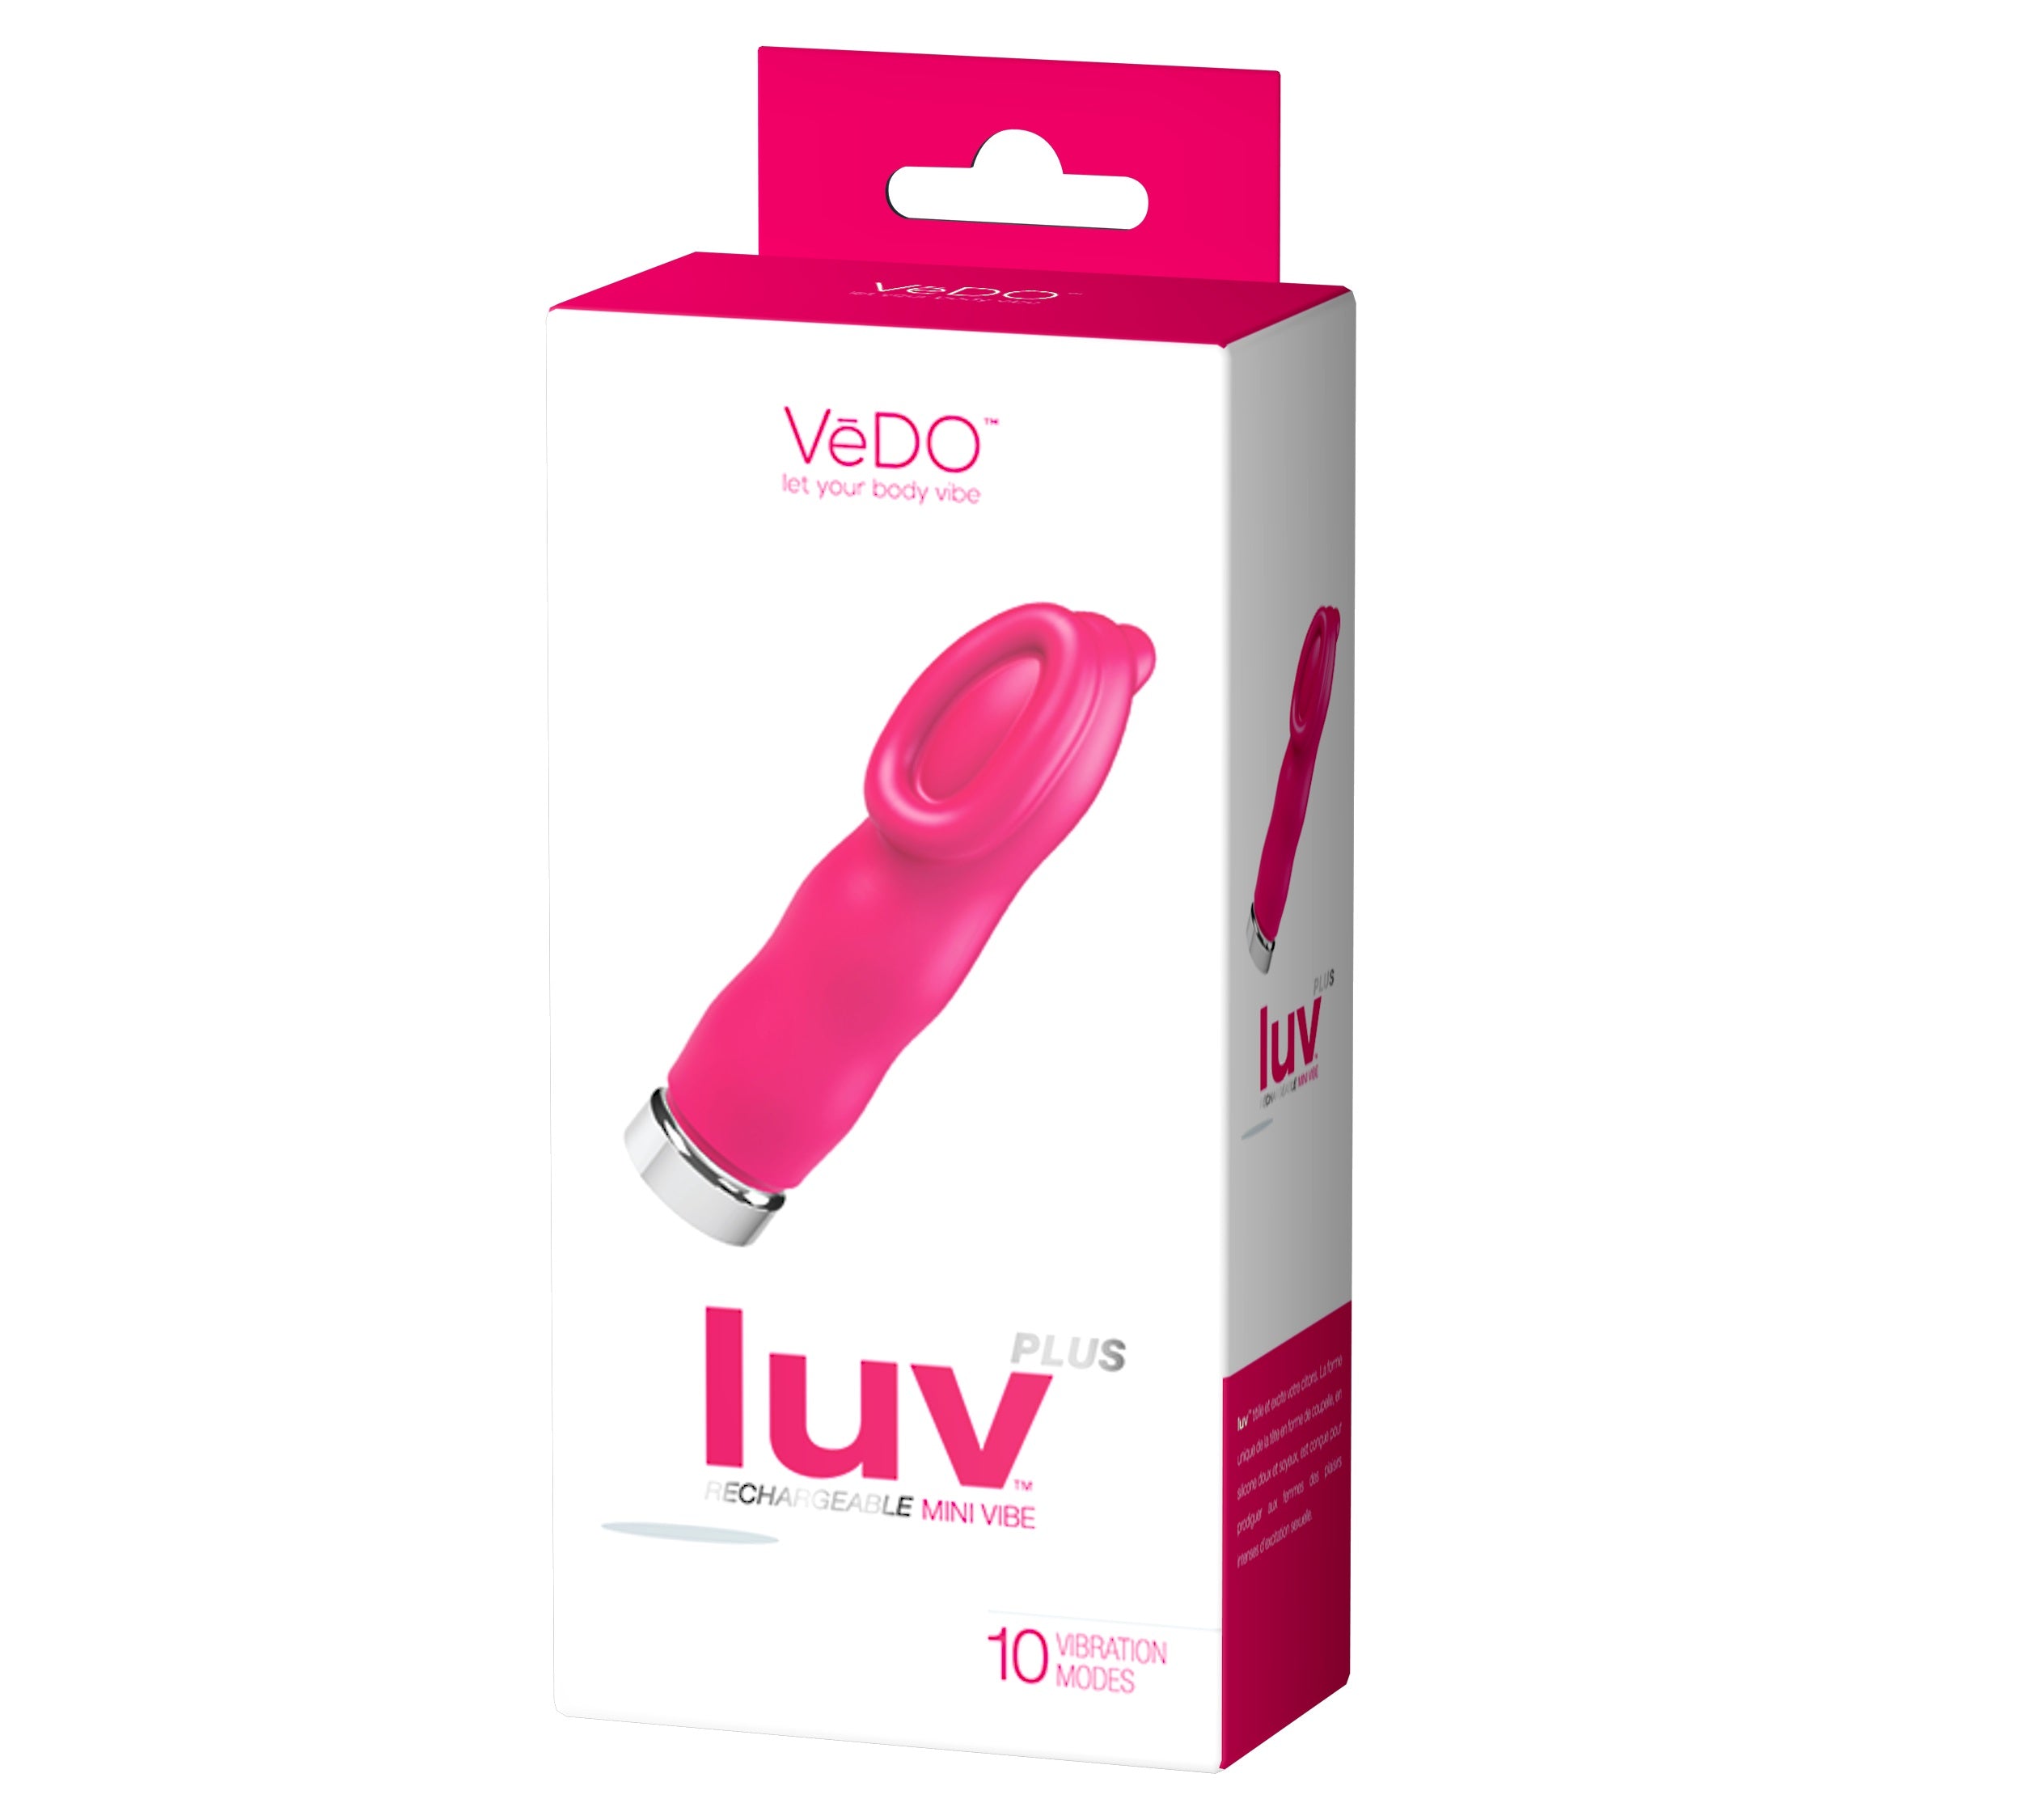 Luv Plus Rechargeable Mini Vibrator - Hot in Bed Pink Foxy Pink